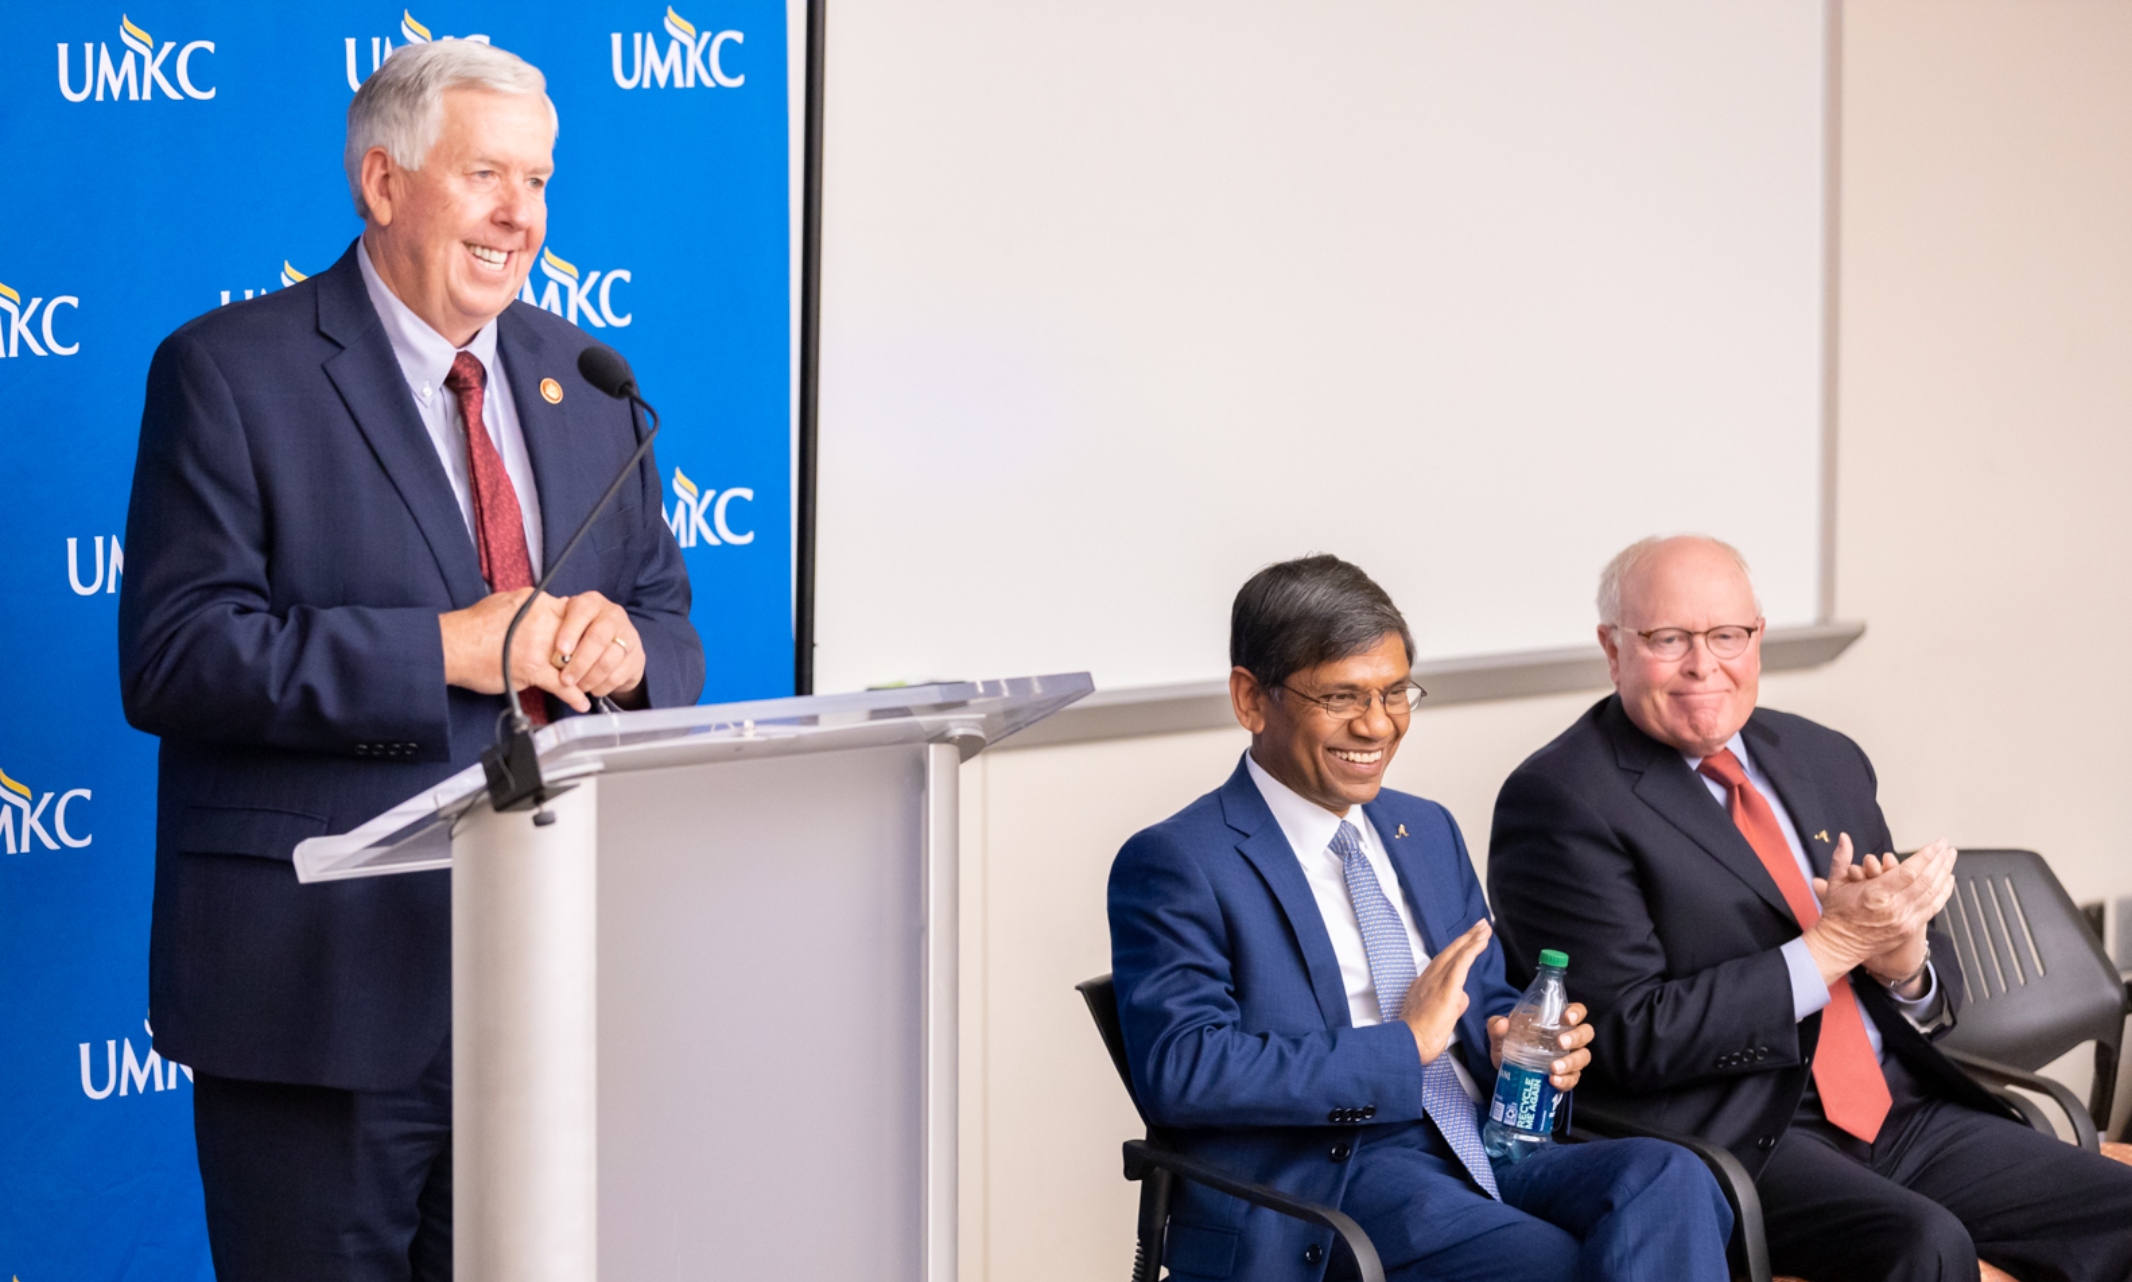 Governor Mike Parson stands smiling at a podium with a UMKC backdrop behind him. Chancellor Mauli Agrawal is seated to the governor's left, smiling.